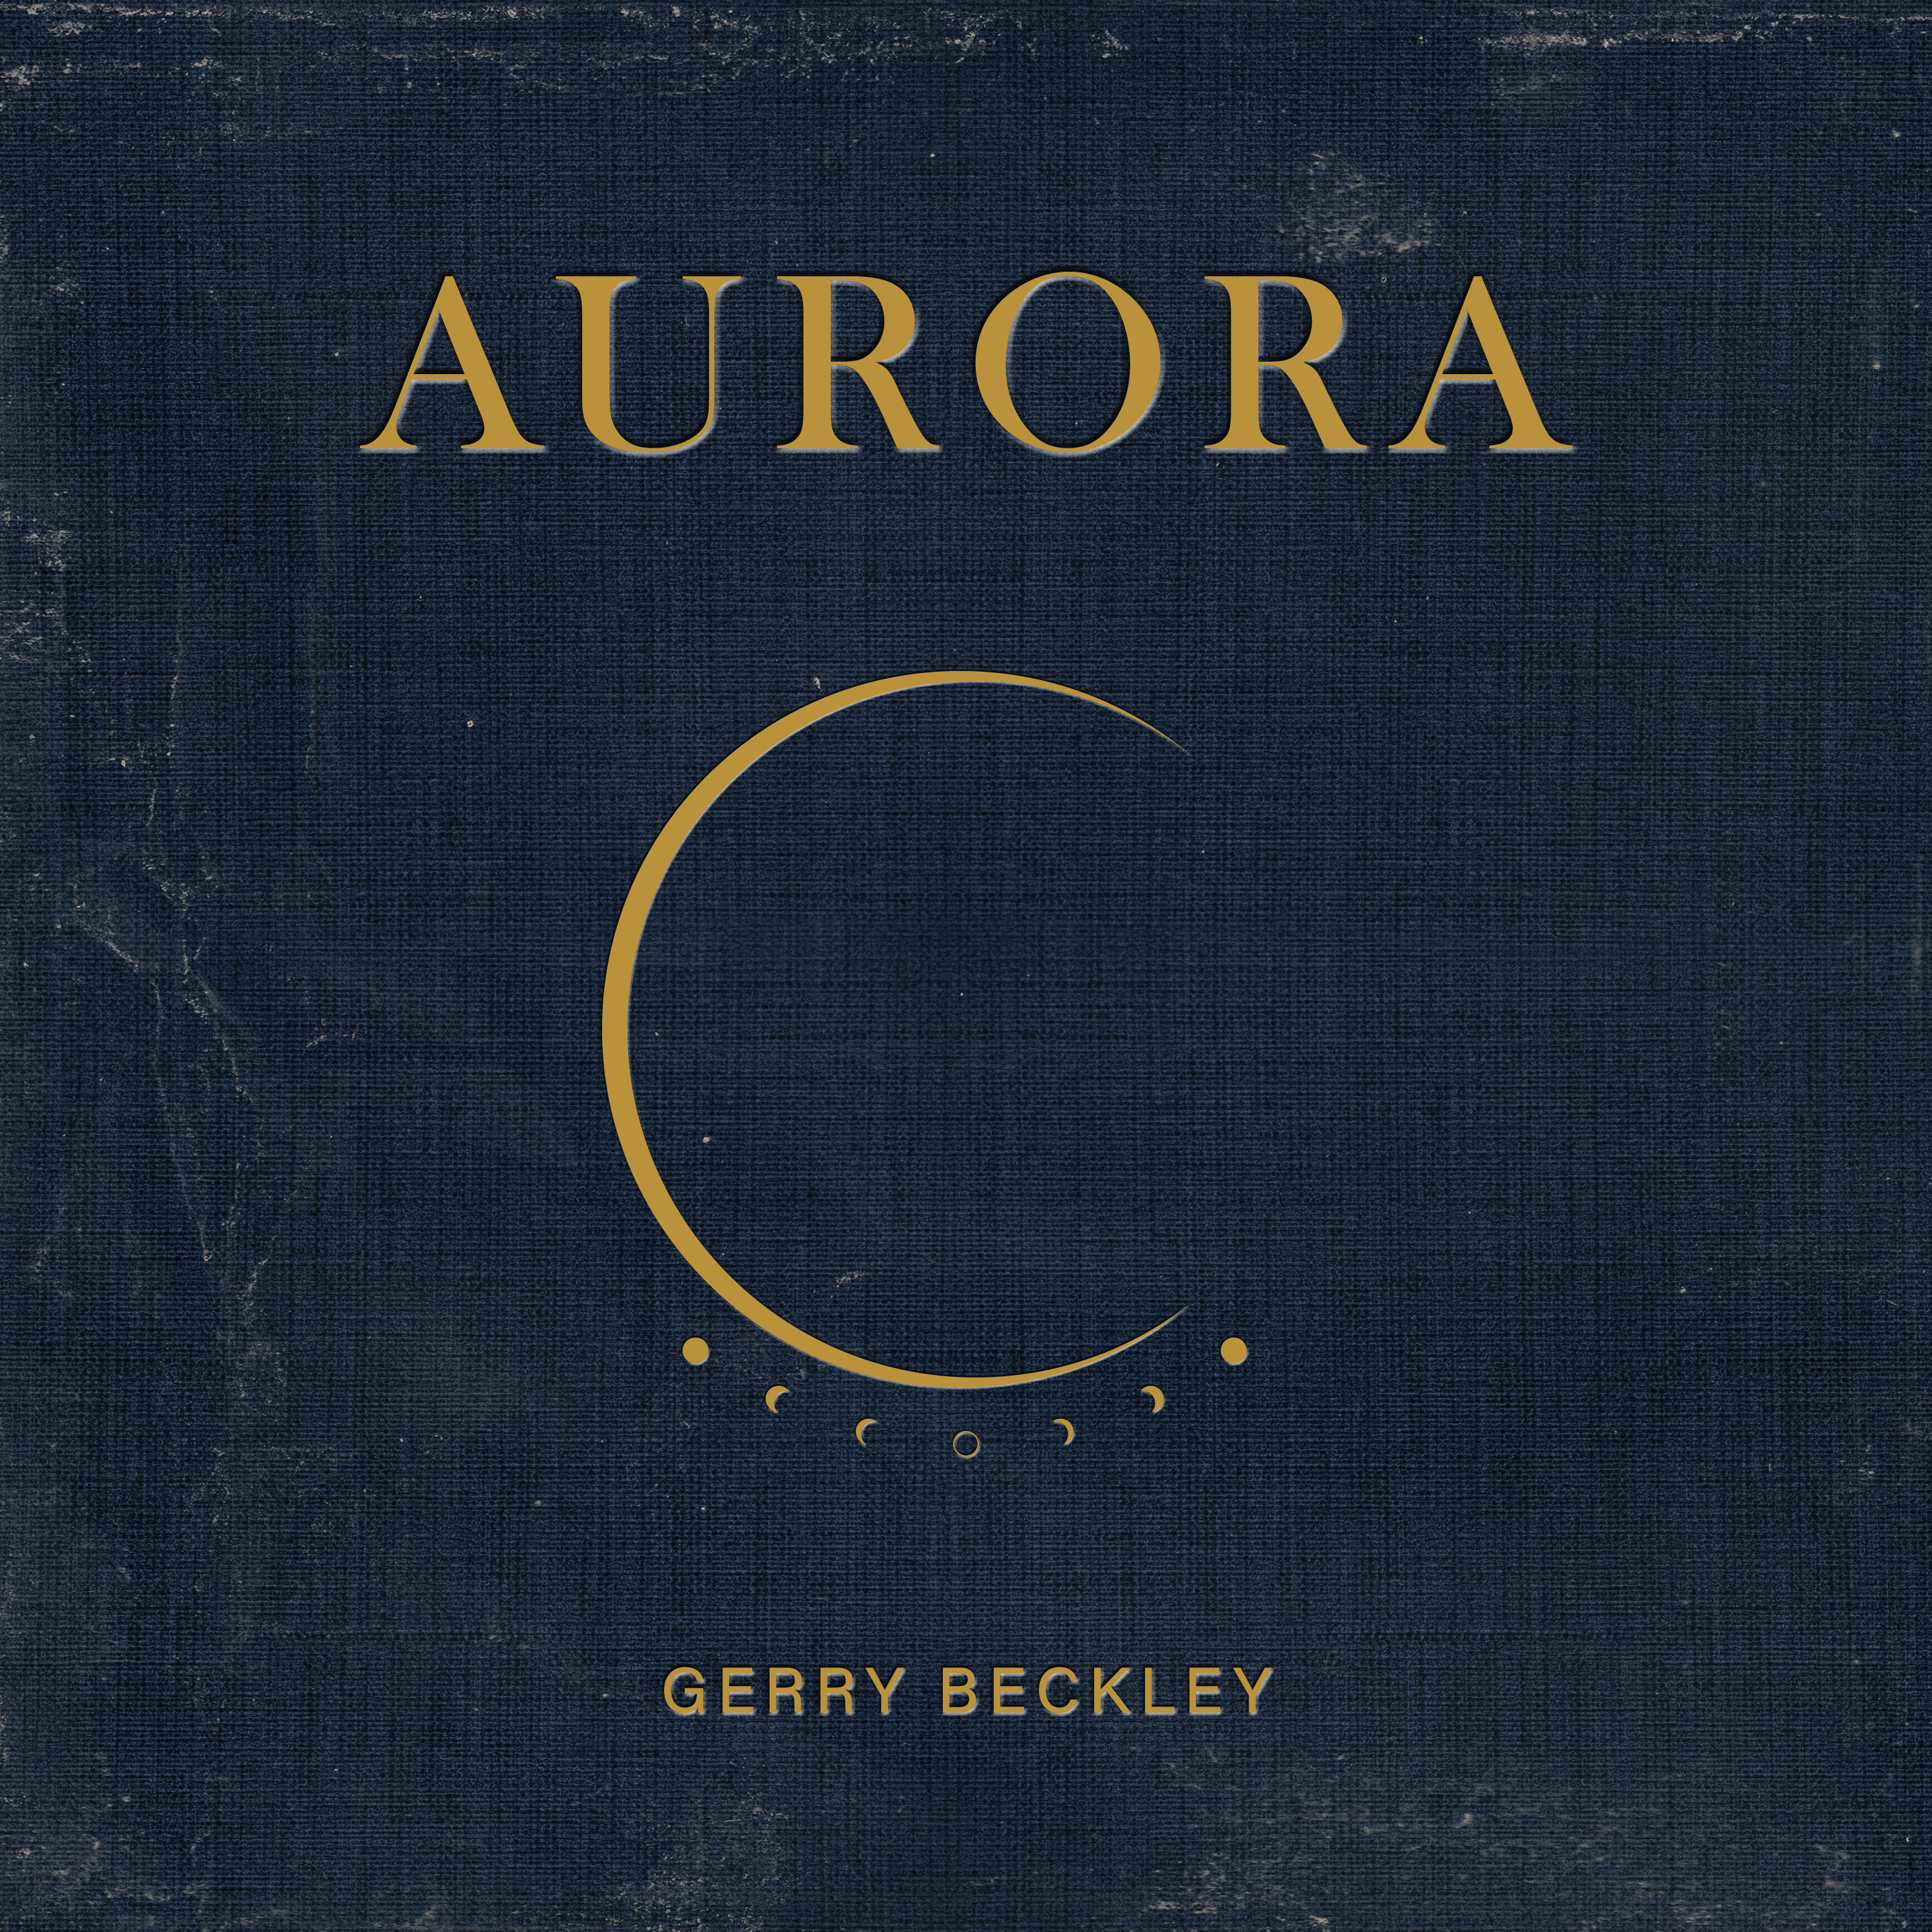 America's GERRY BECKLEY Releases "Aurora" - Title Track to New Album out Now